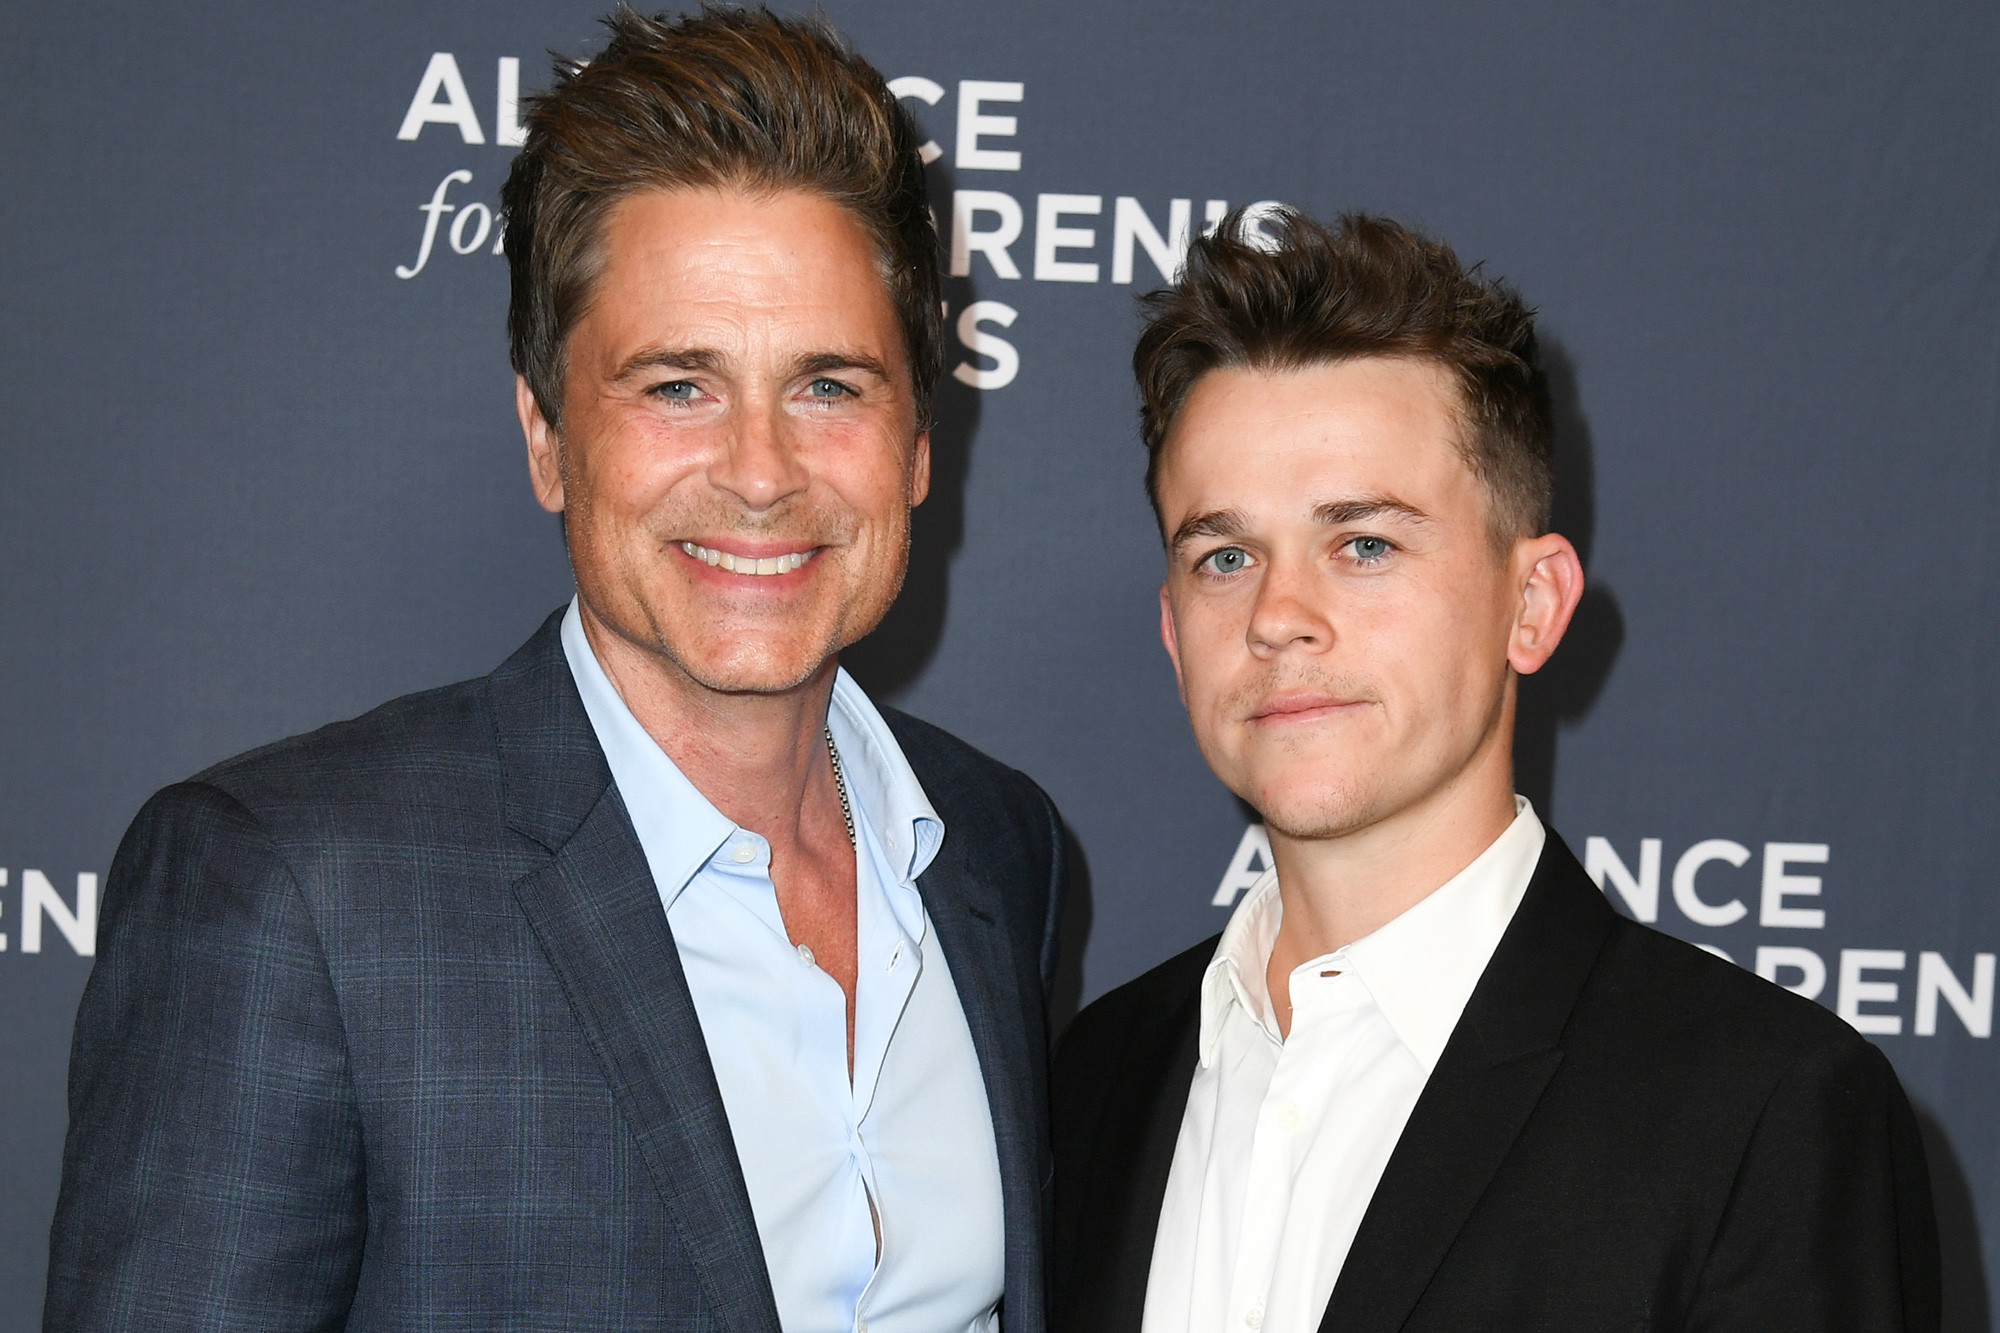 Rob Lowe and John Owen Lowe to bring father-son dynamic to new comedy series